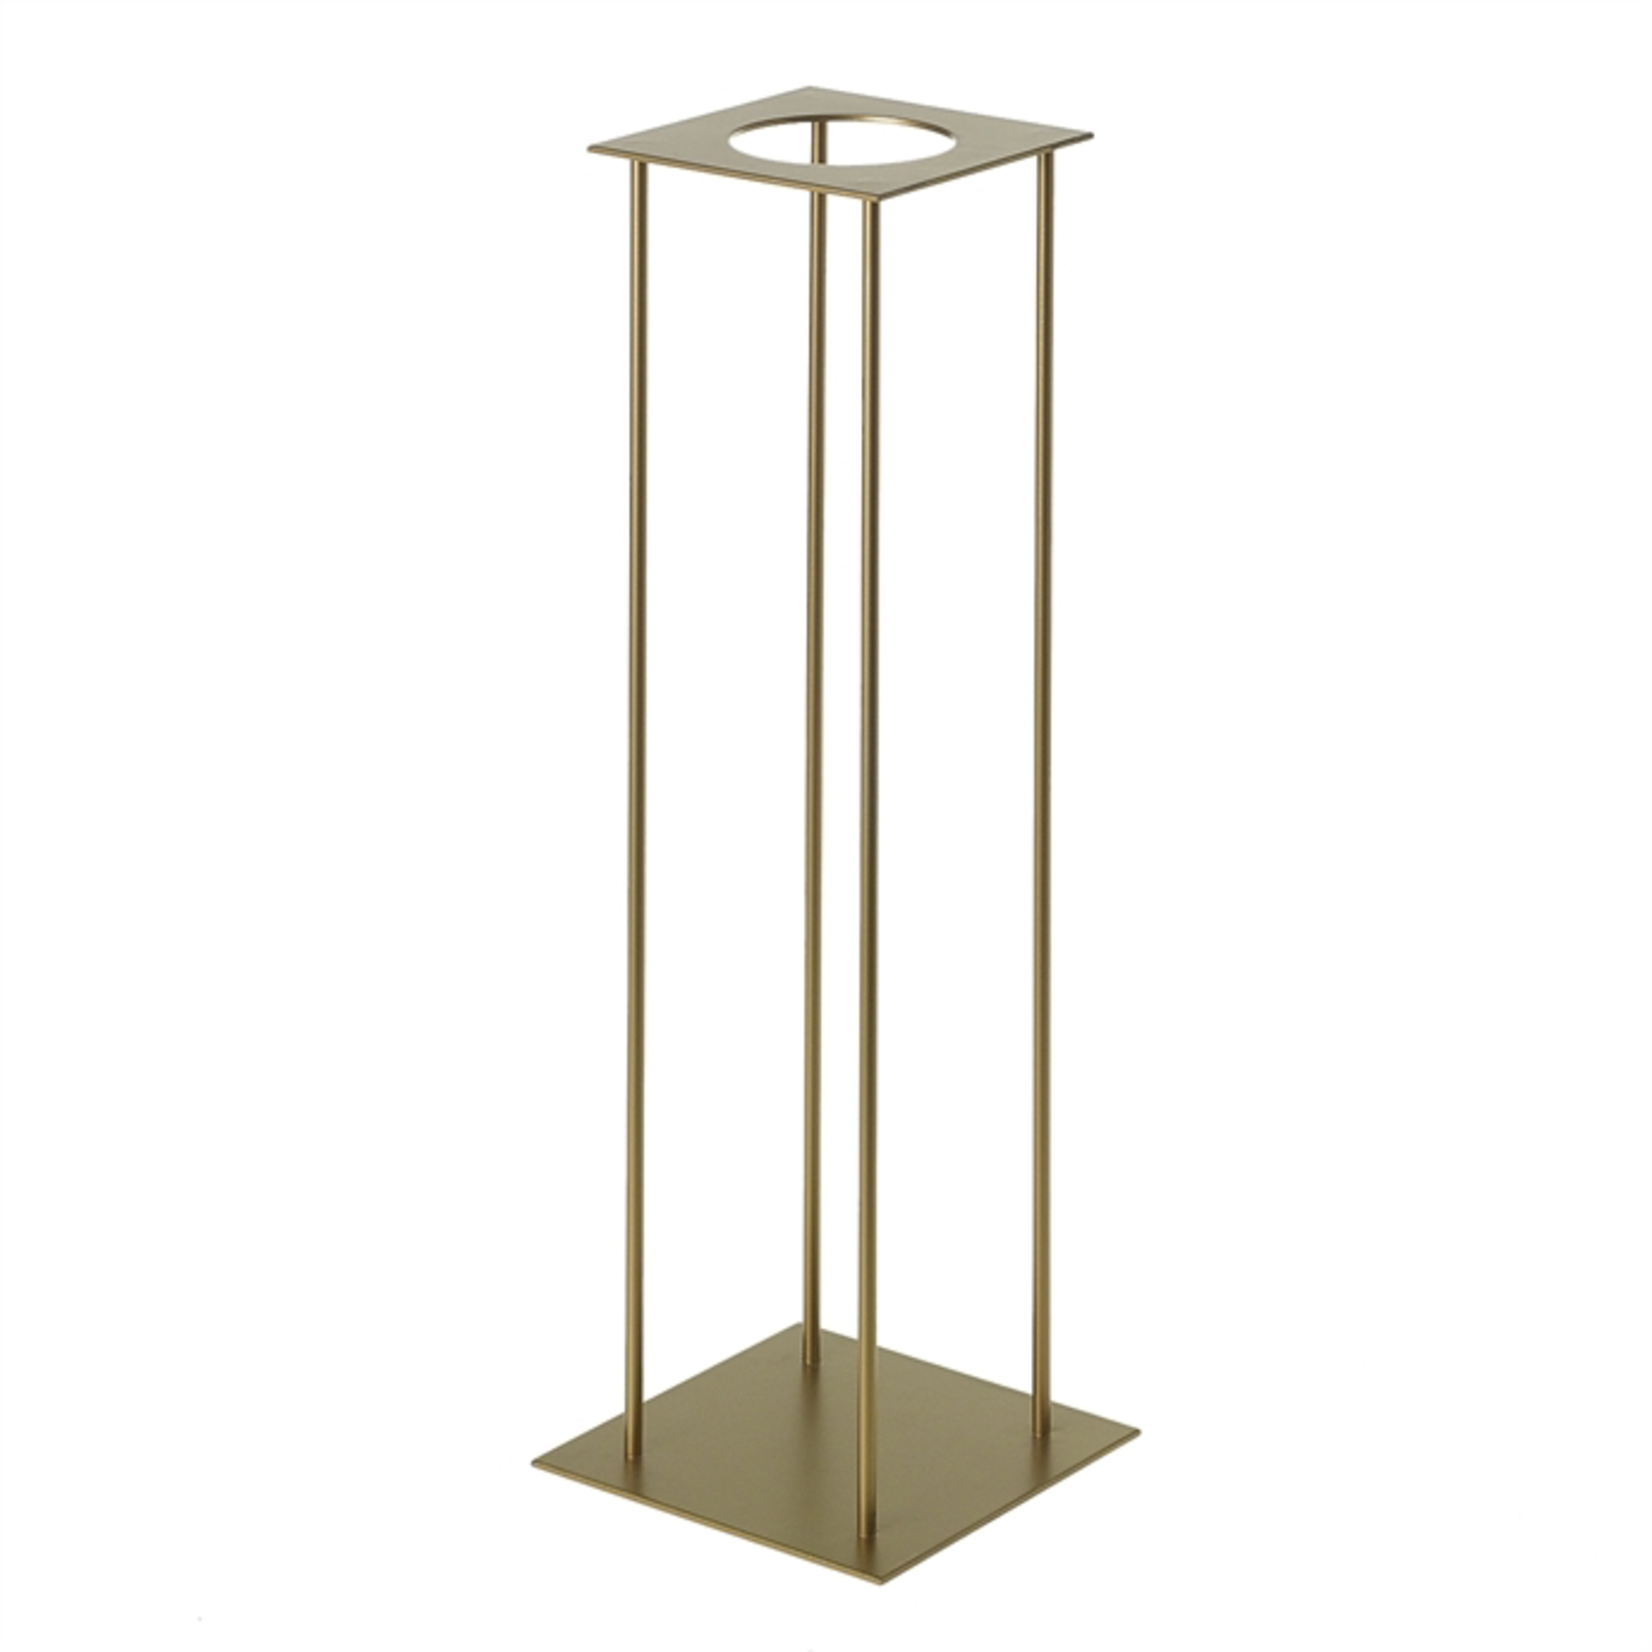 29.5” X8” X 8” GOLD HARLOW STAND (AD)